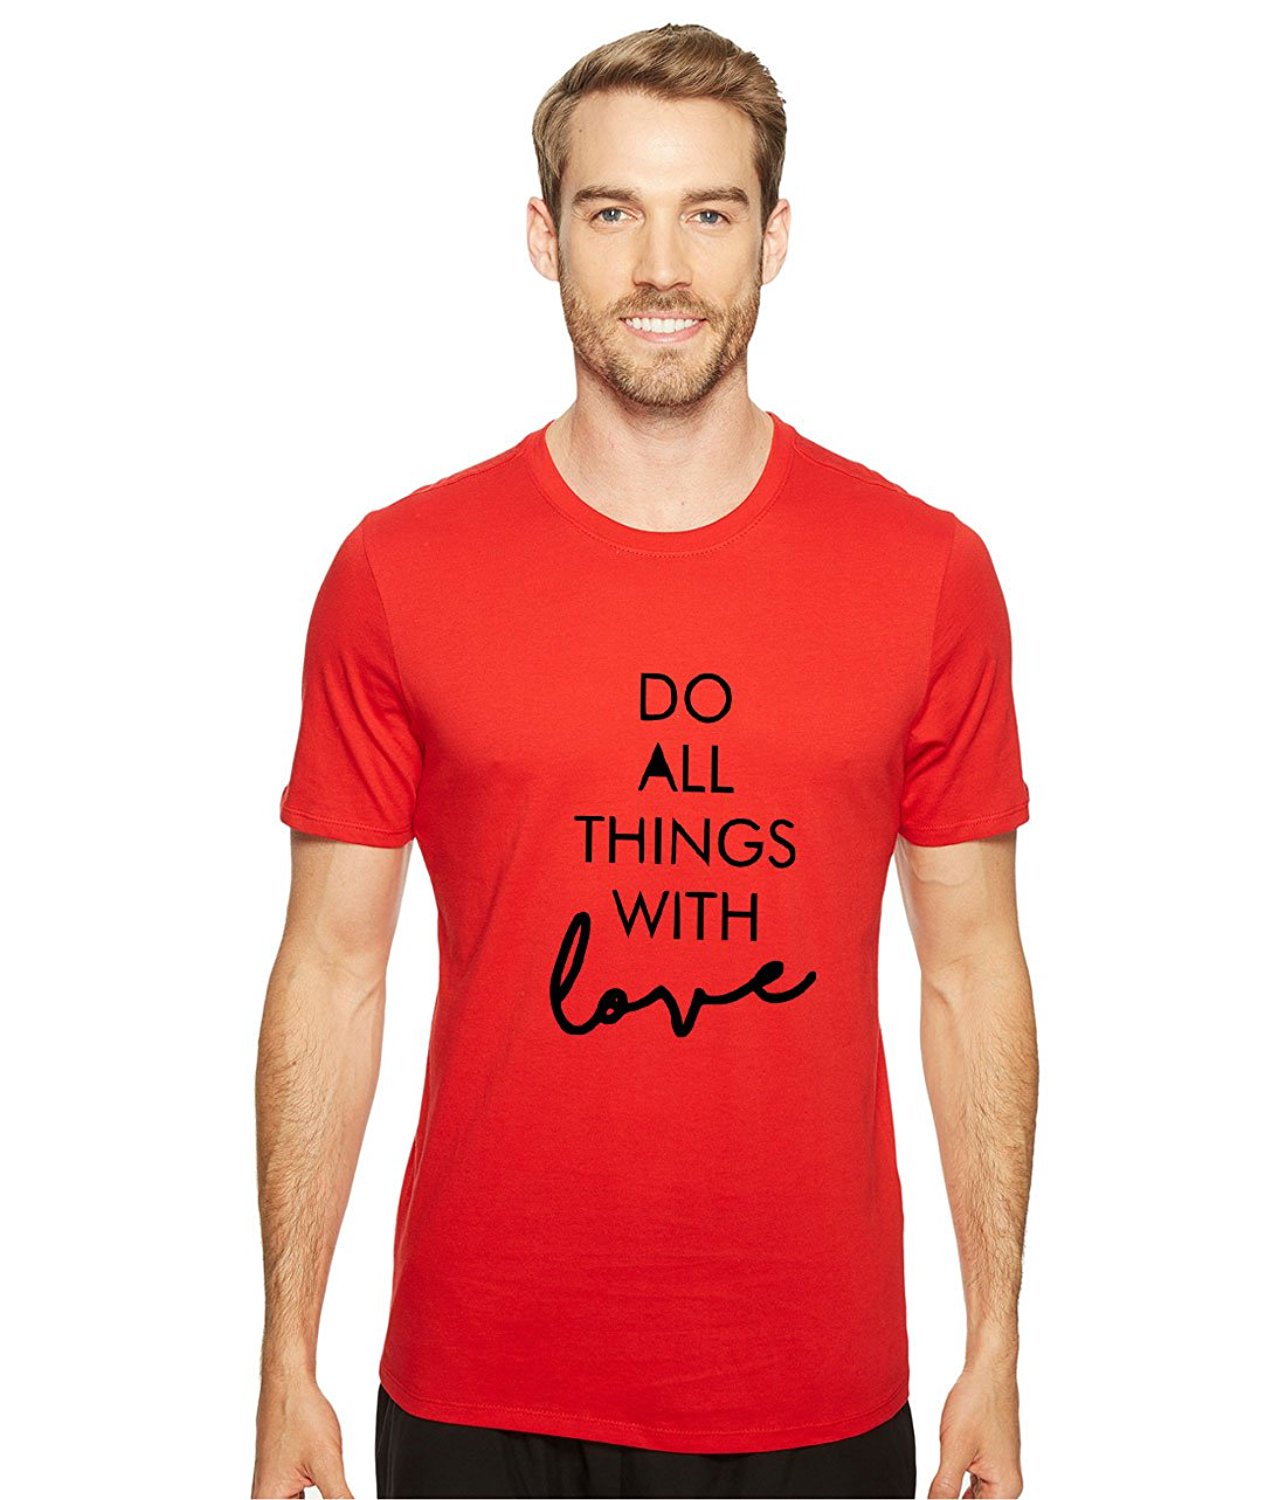 DOUBLE F ROUND NECK HALF SLEEVE DO ALL THING WITH LOVE WITH 07 COLOR PRINTED T-SHIRT FOR MEN